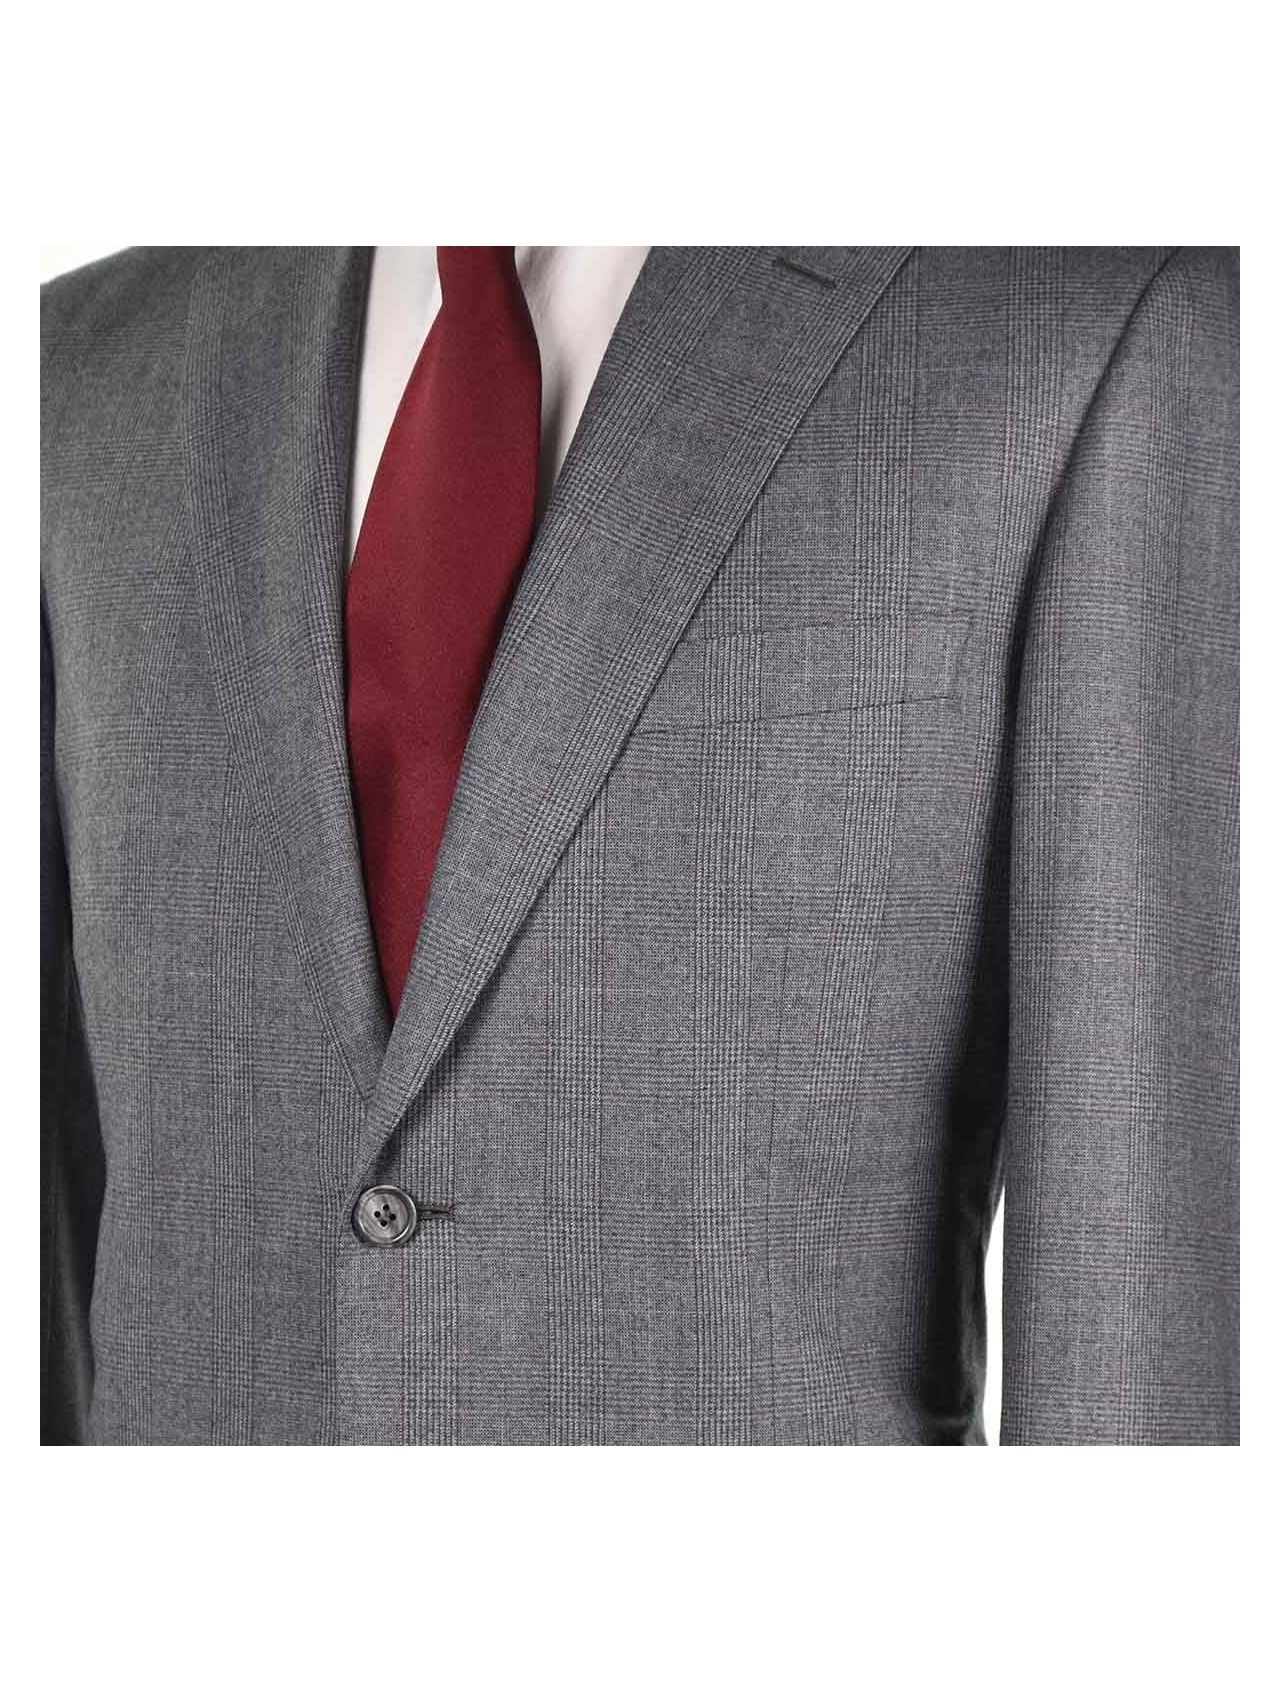 Brioni Made in Italy Wool Palatino Striped Grey 3 Button Suit Jacket 40R |  eBay